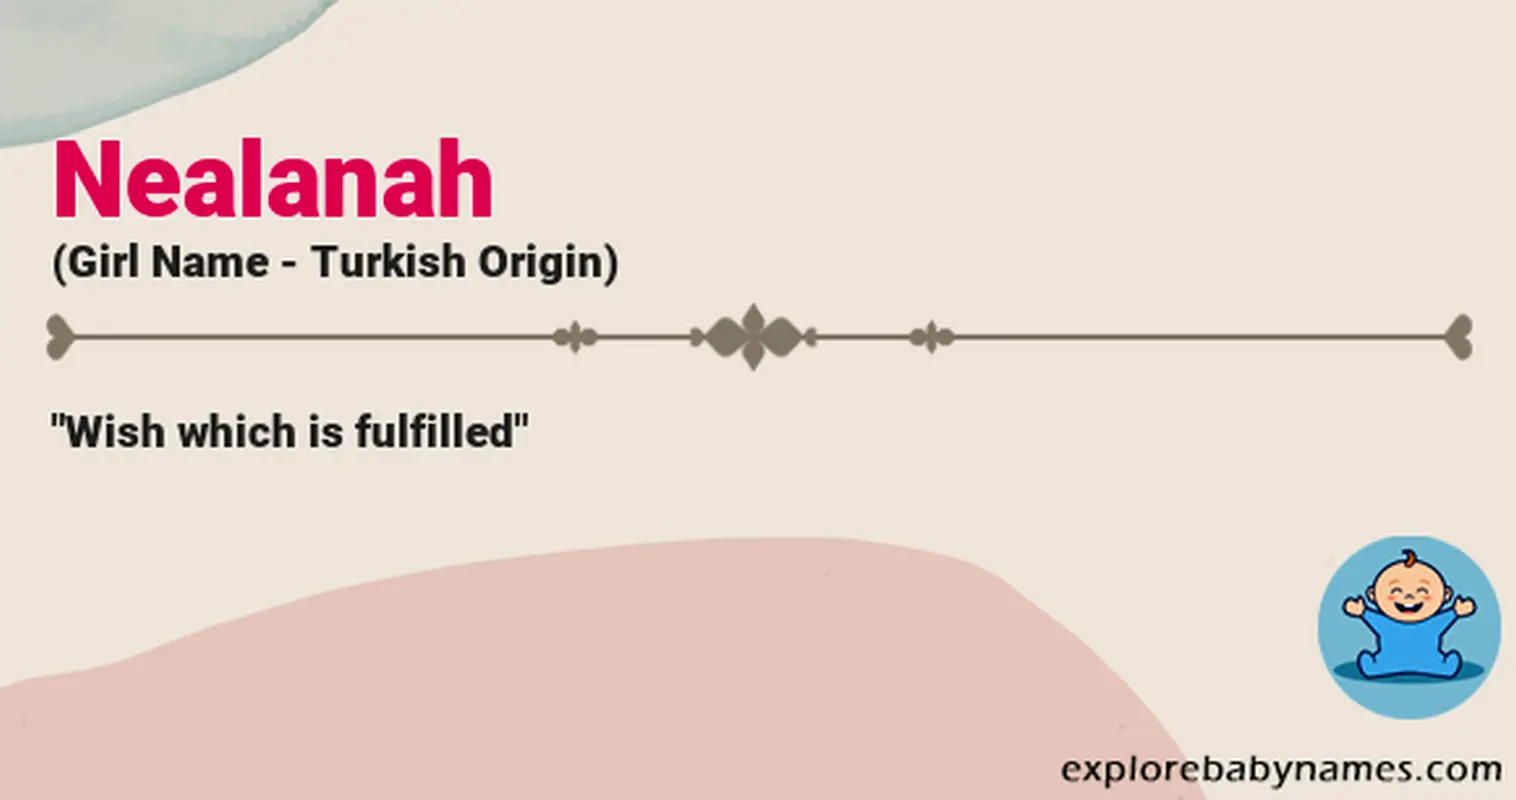 Meaning of Nealanah